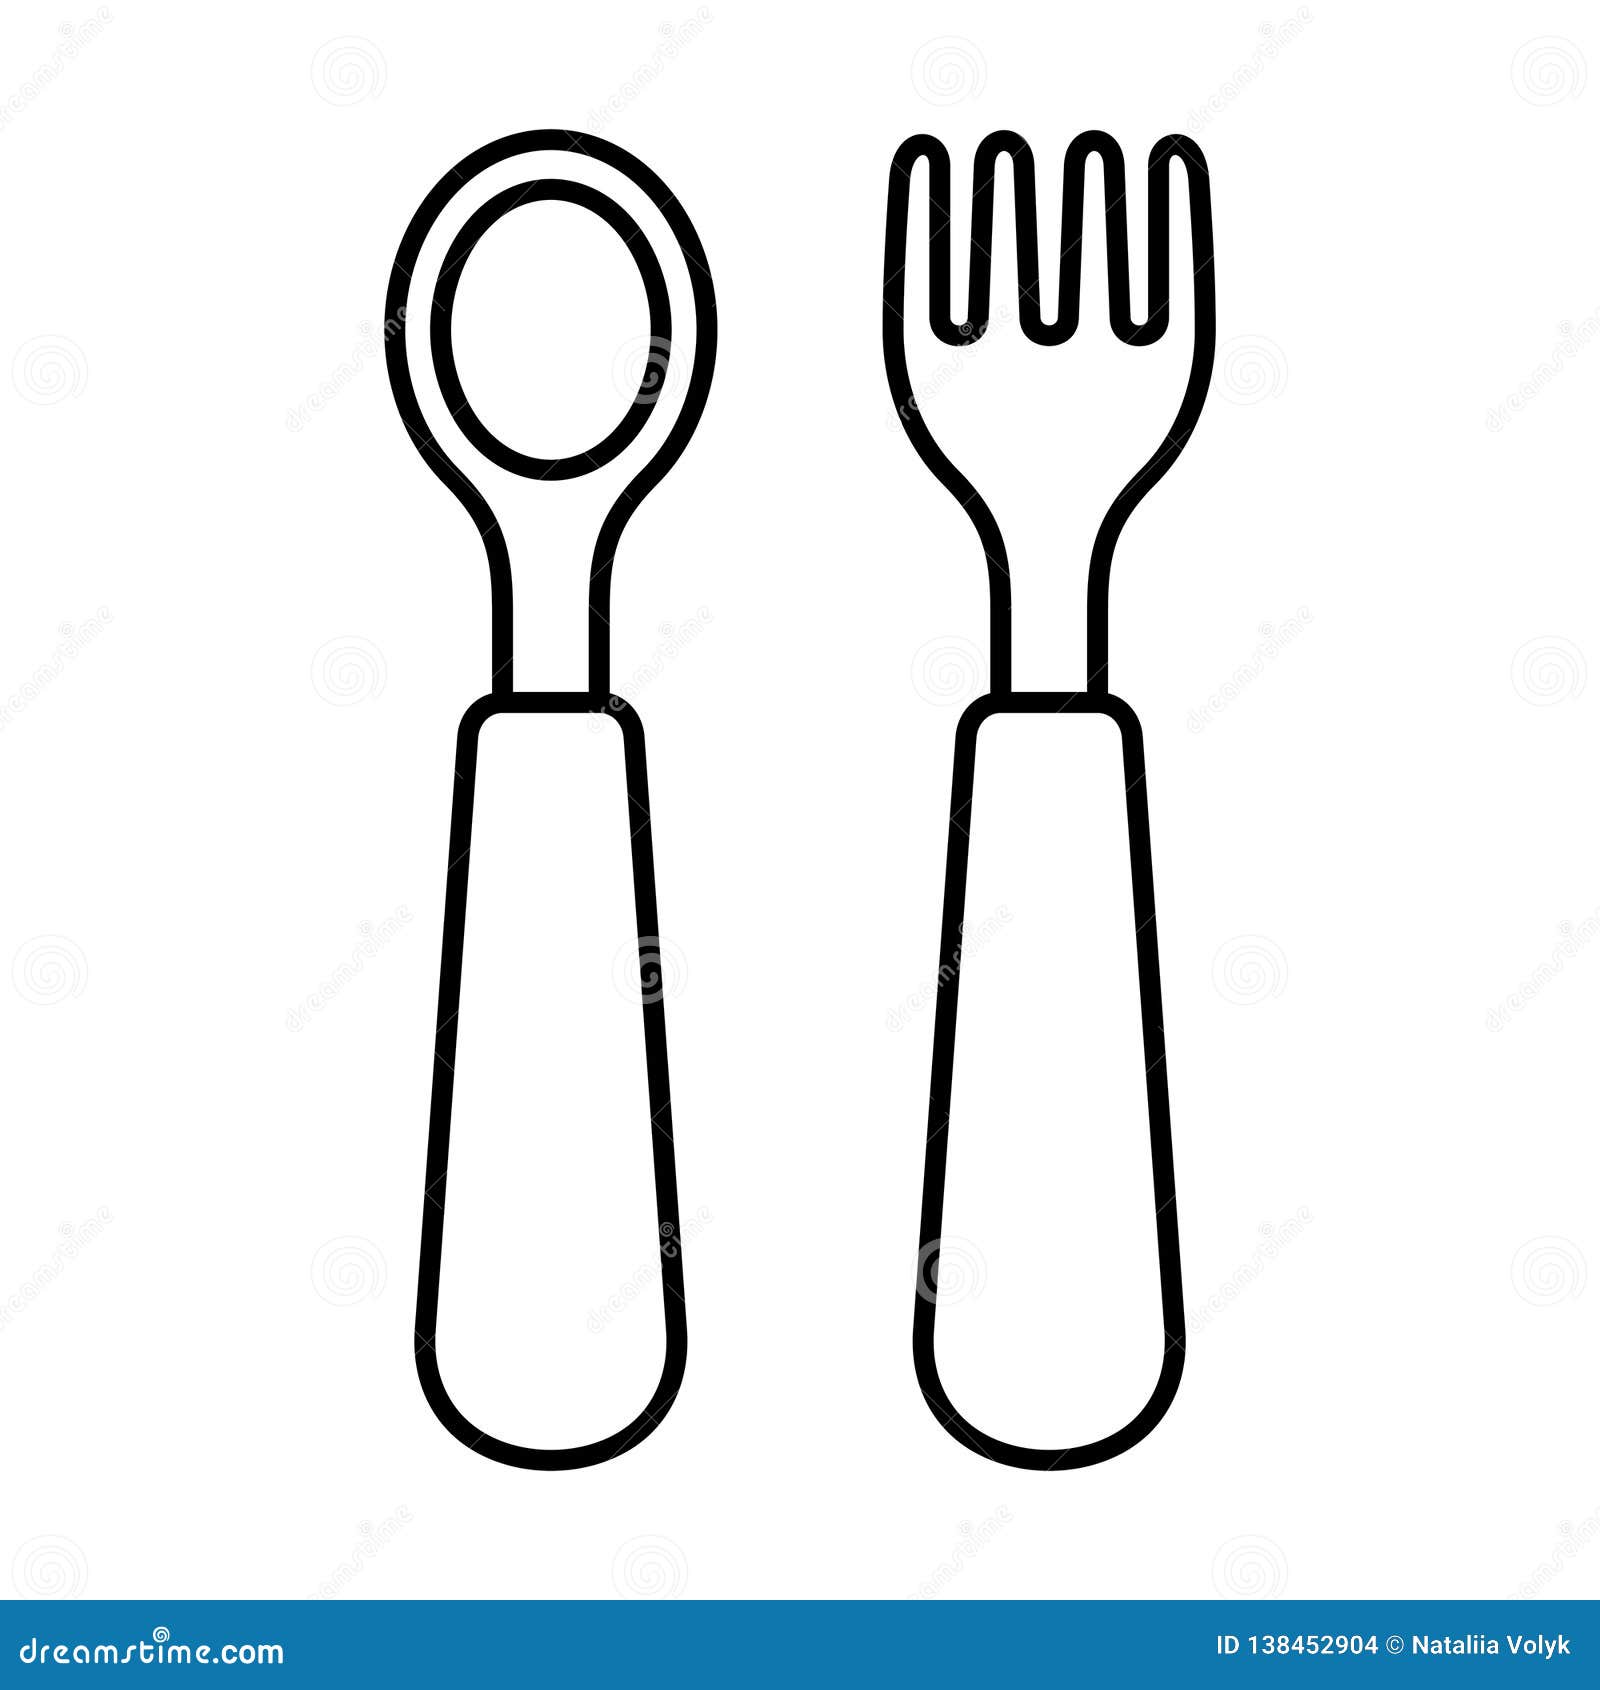 https://thumbs.dreamstime.com/z/baby-spoon-fork-icon-baby-spoon-fork-icon-isolated-white-background-138452904.jpg